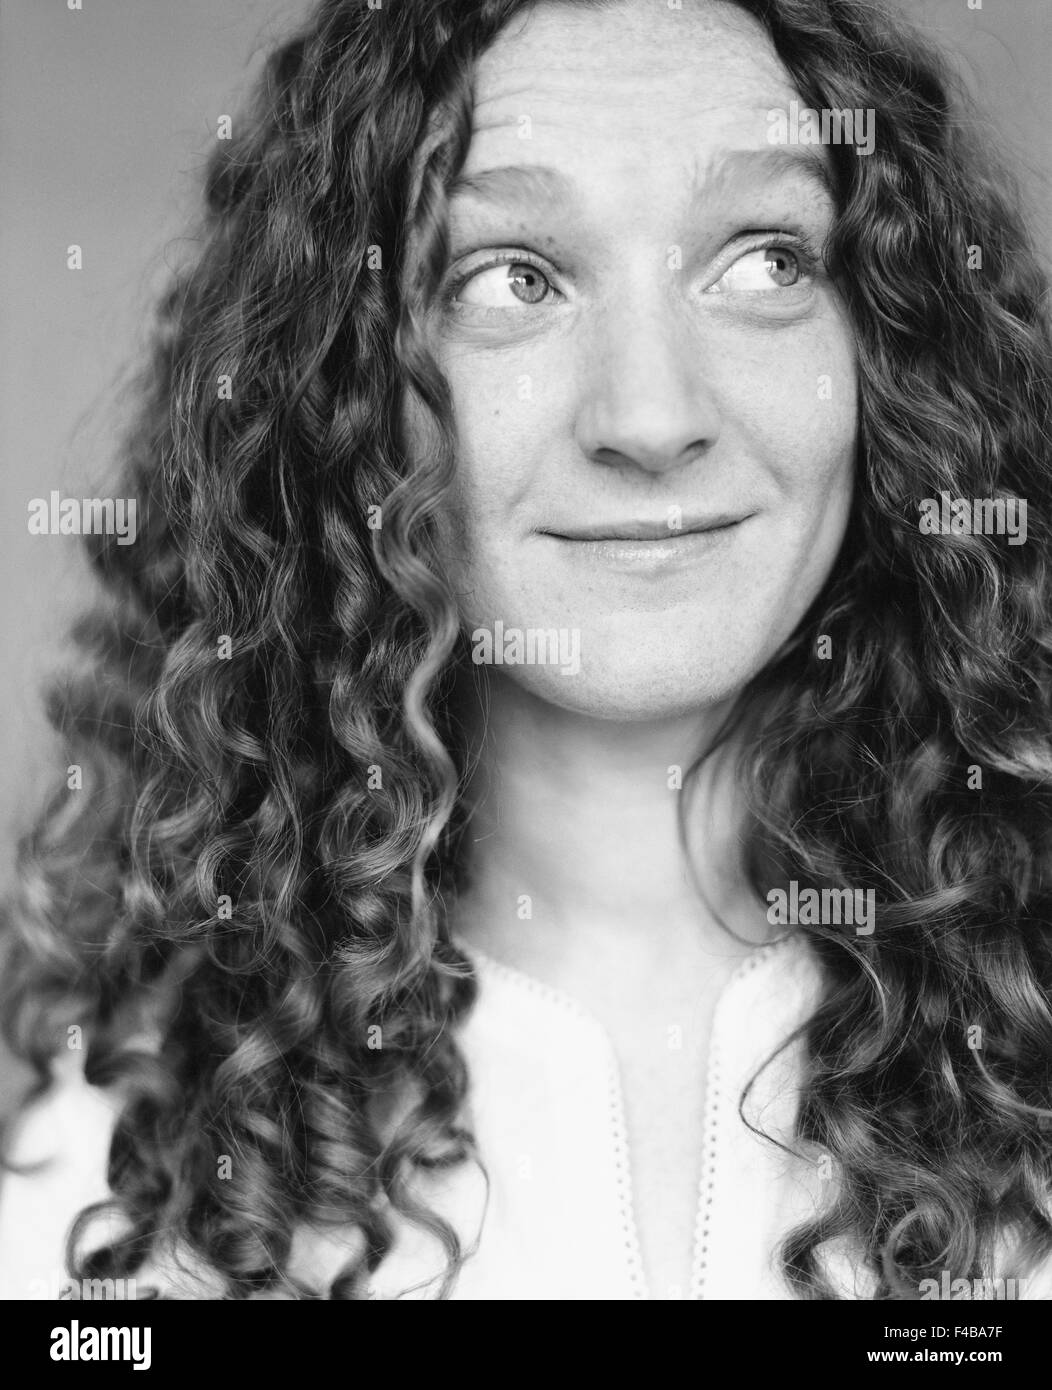 30-34 years adults only black and white catalogue 2 curly hair emotional series expression friendly glance happy indoors long Stock Photo